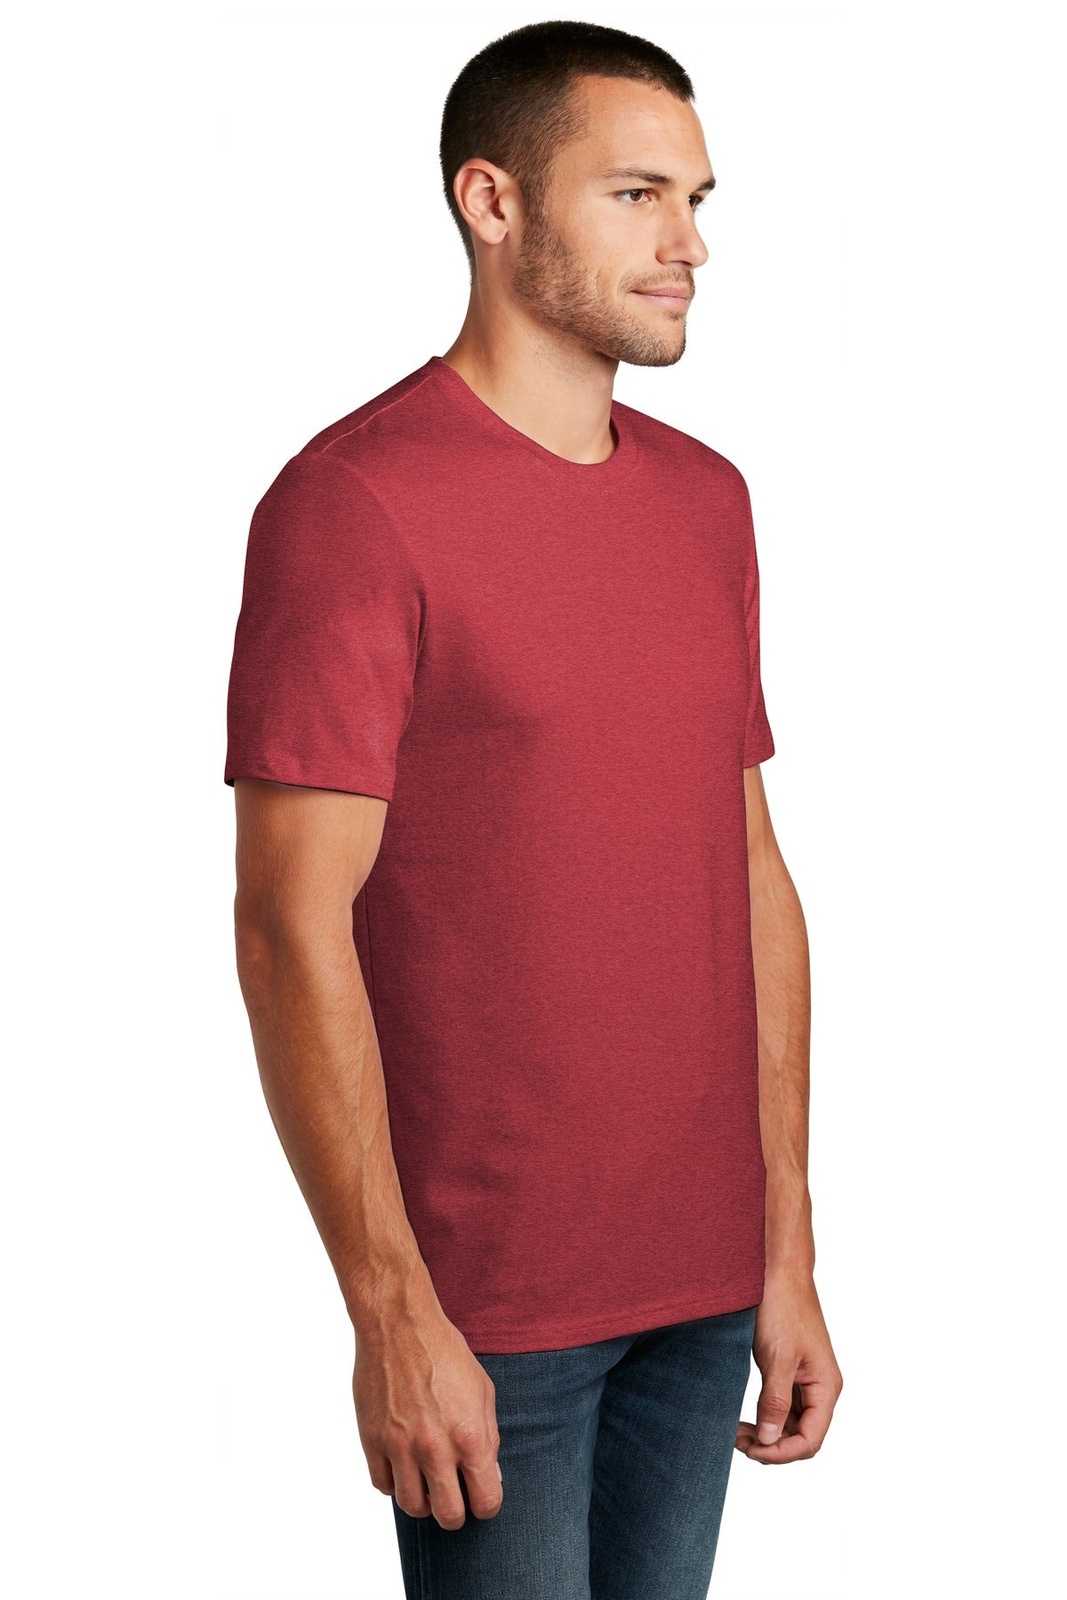 District DT7500 Flex Tee - Heathered Red - HIT a Double - 4